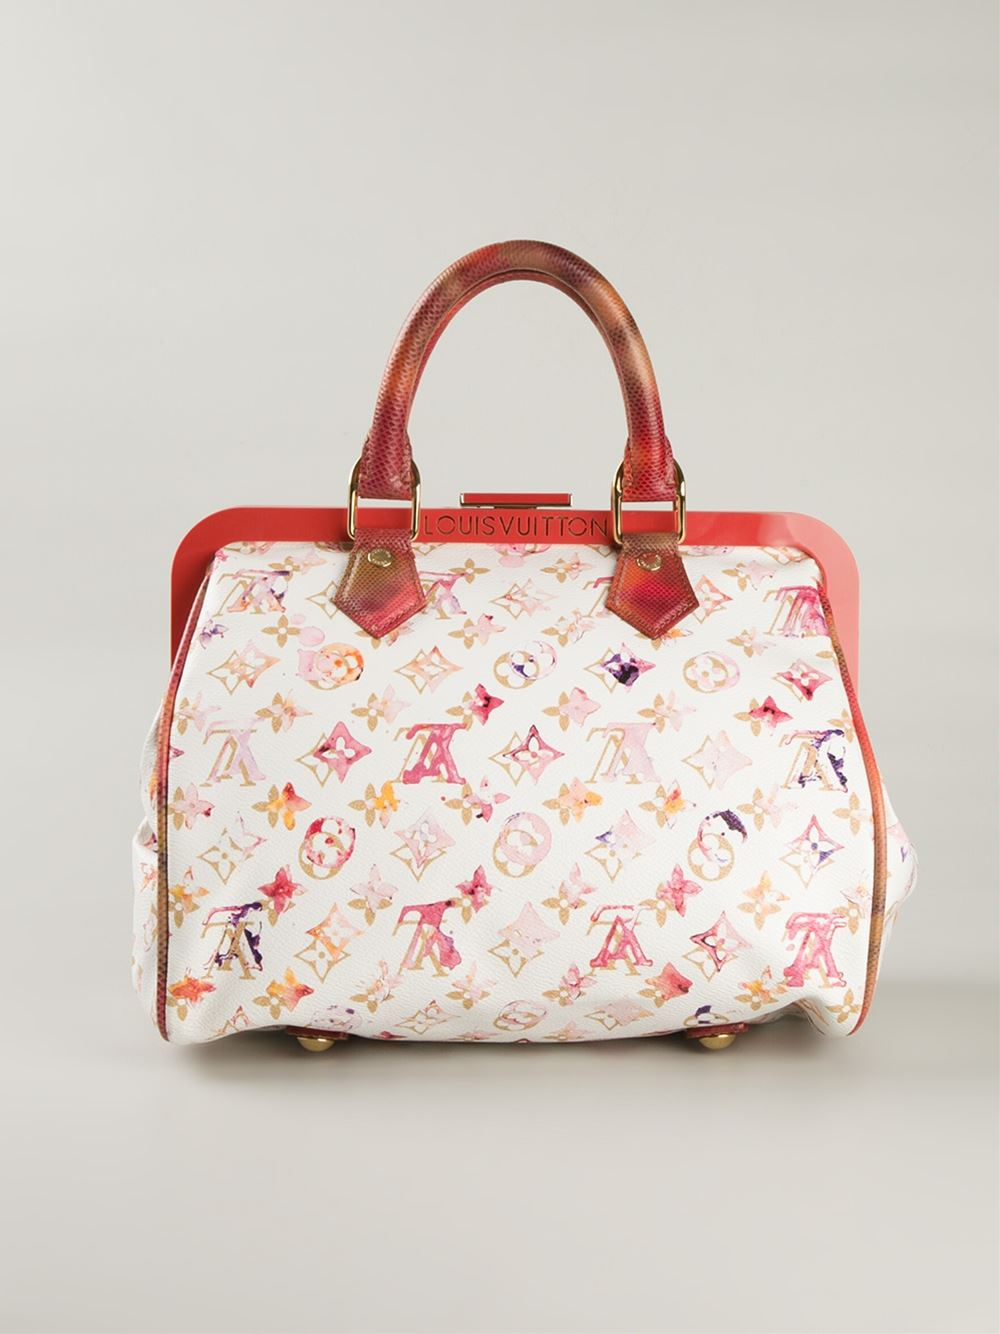 Louis Vuitton Leather Speedy Watercolour Bag in White (Red) - Lyst